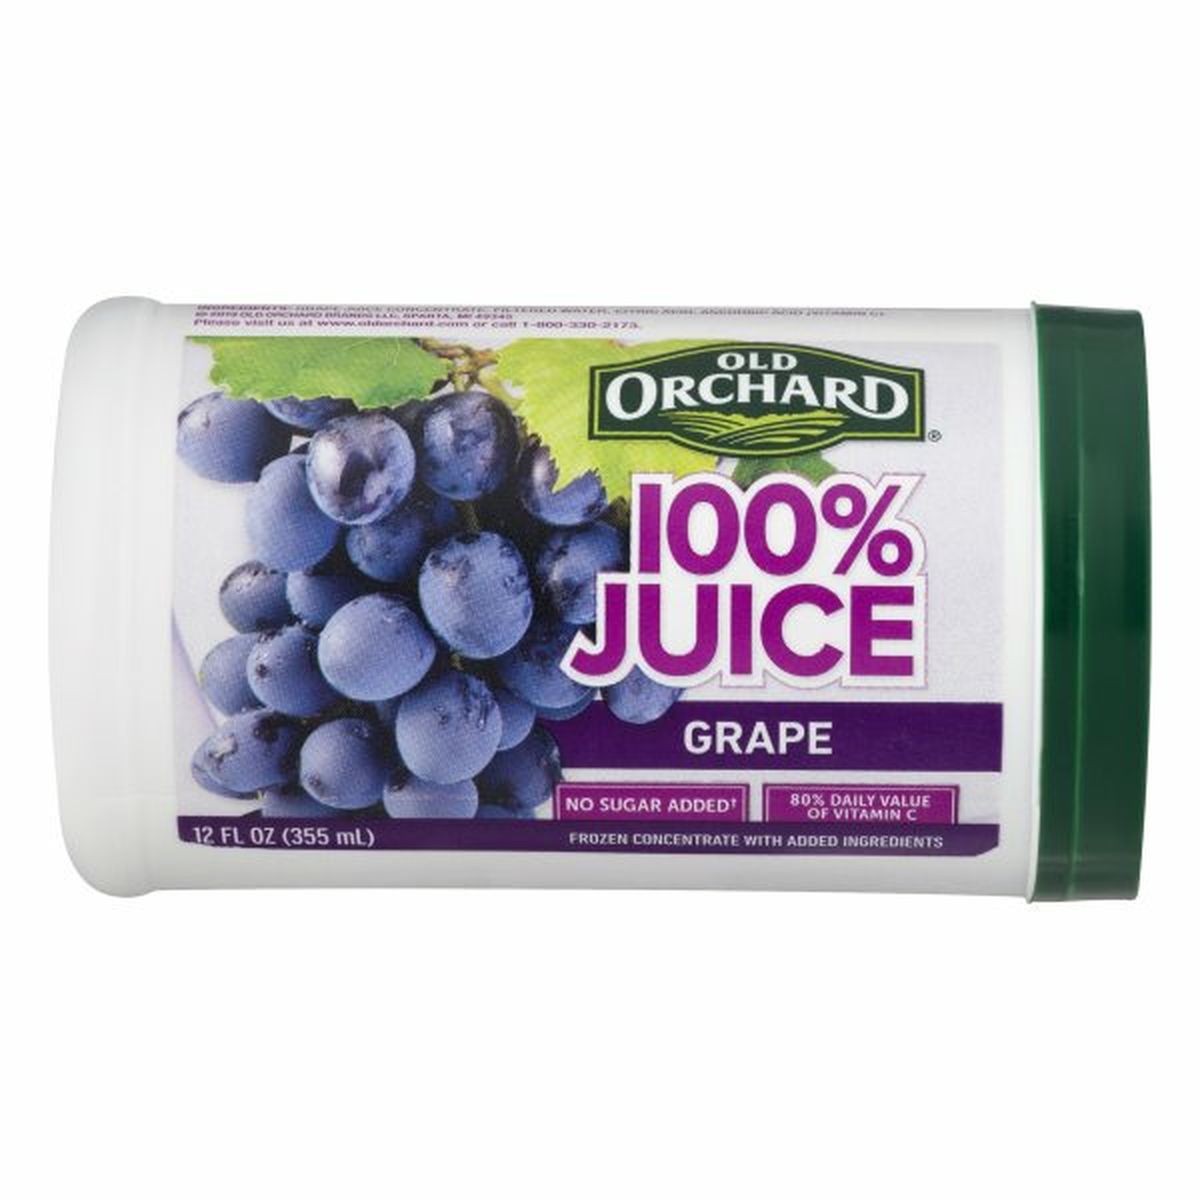 Calories in Old Orchard 100% Juice, Grape